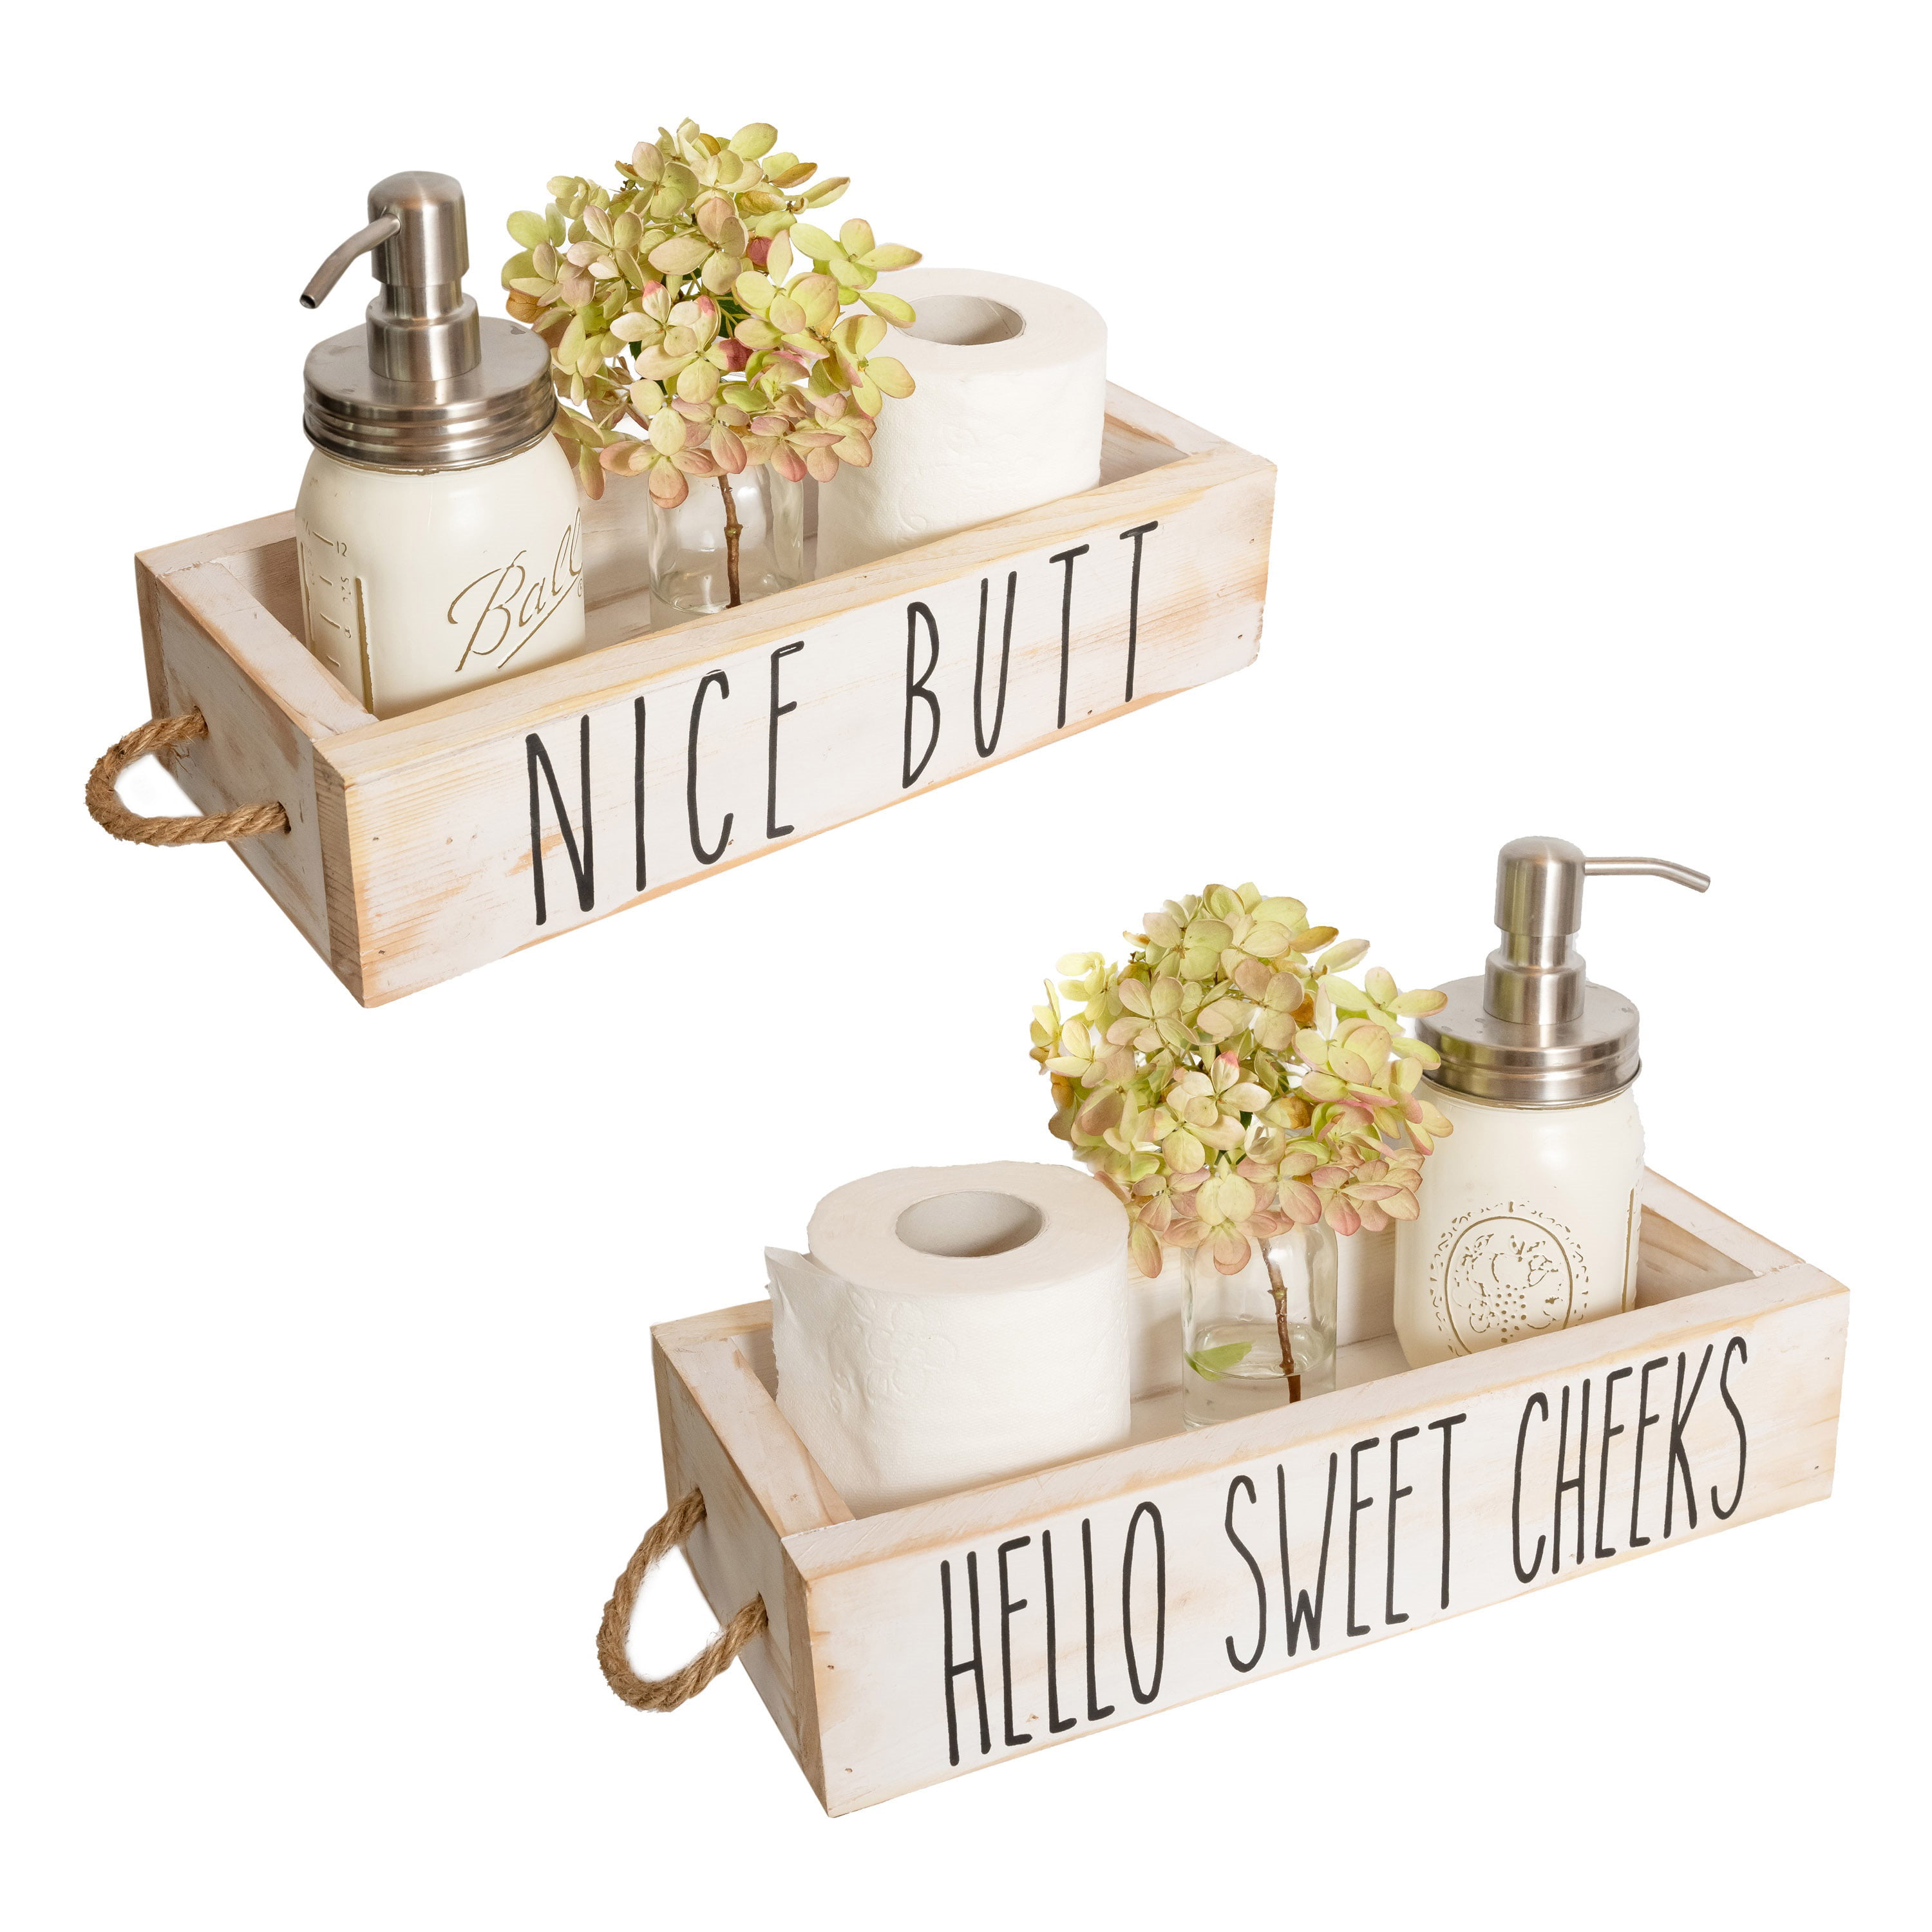 36x20cm Les Premices Nice Butt Bathroom Decor Bigger Box 2 Sided Over Rustic Farmhouse Accents Funny Painted Lettering Toilet Paper Diaper Holder Vanity Storage Organizer White 